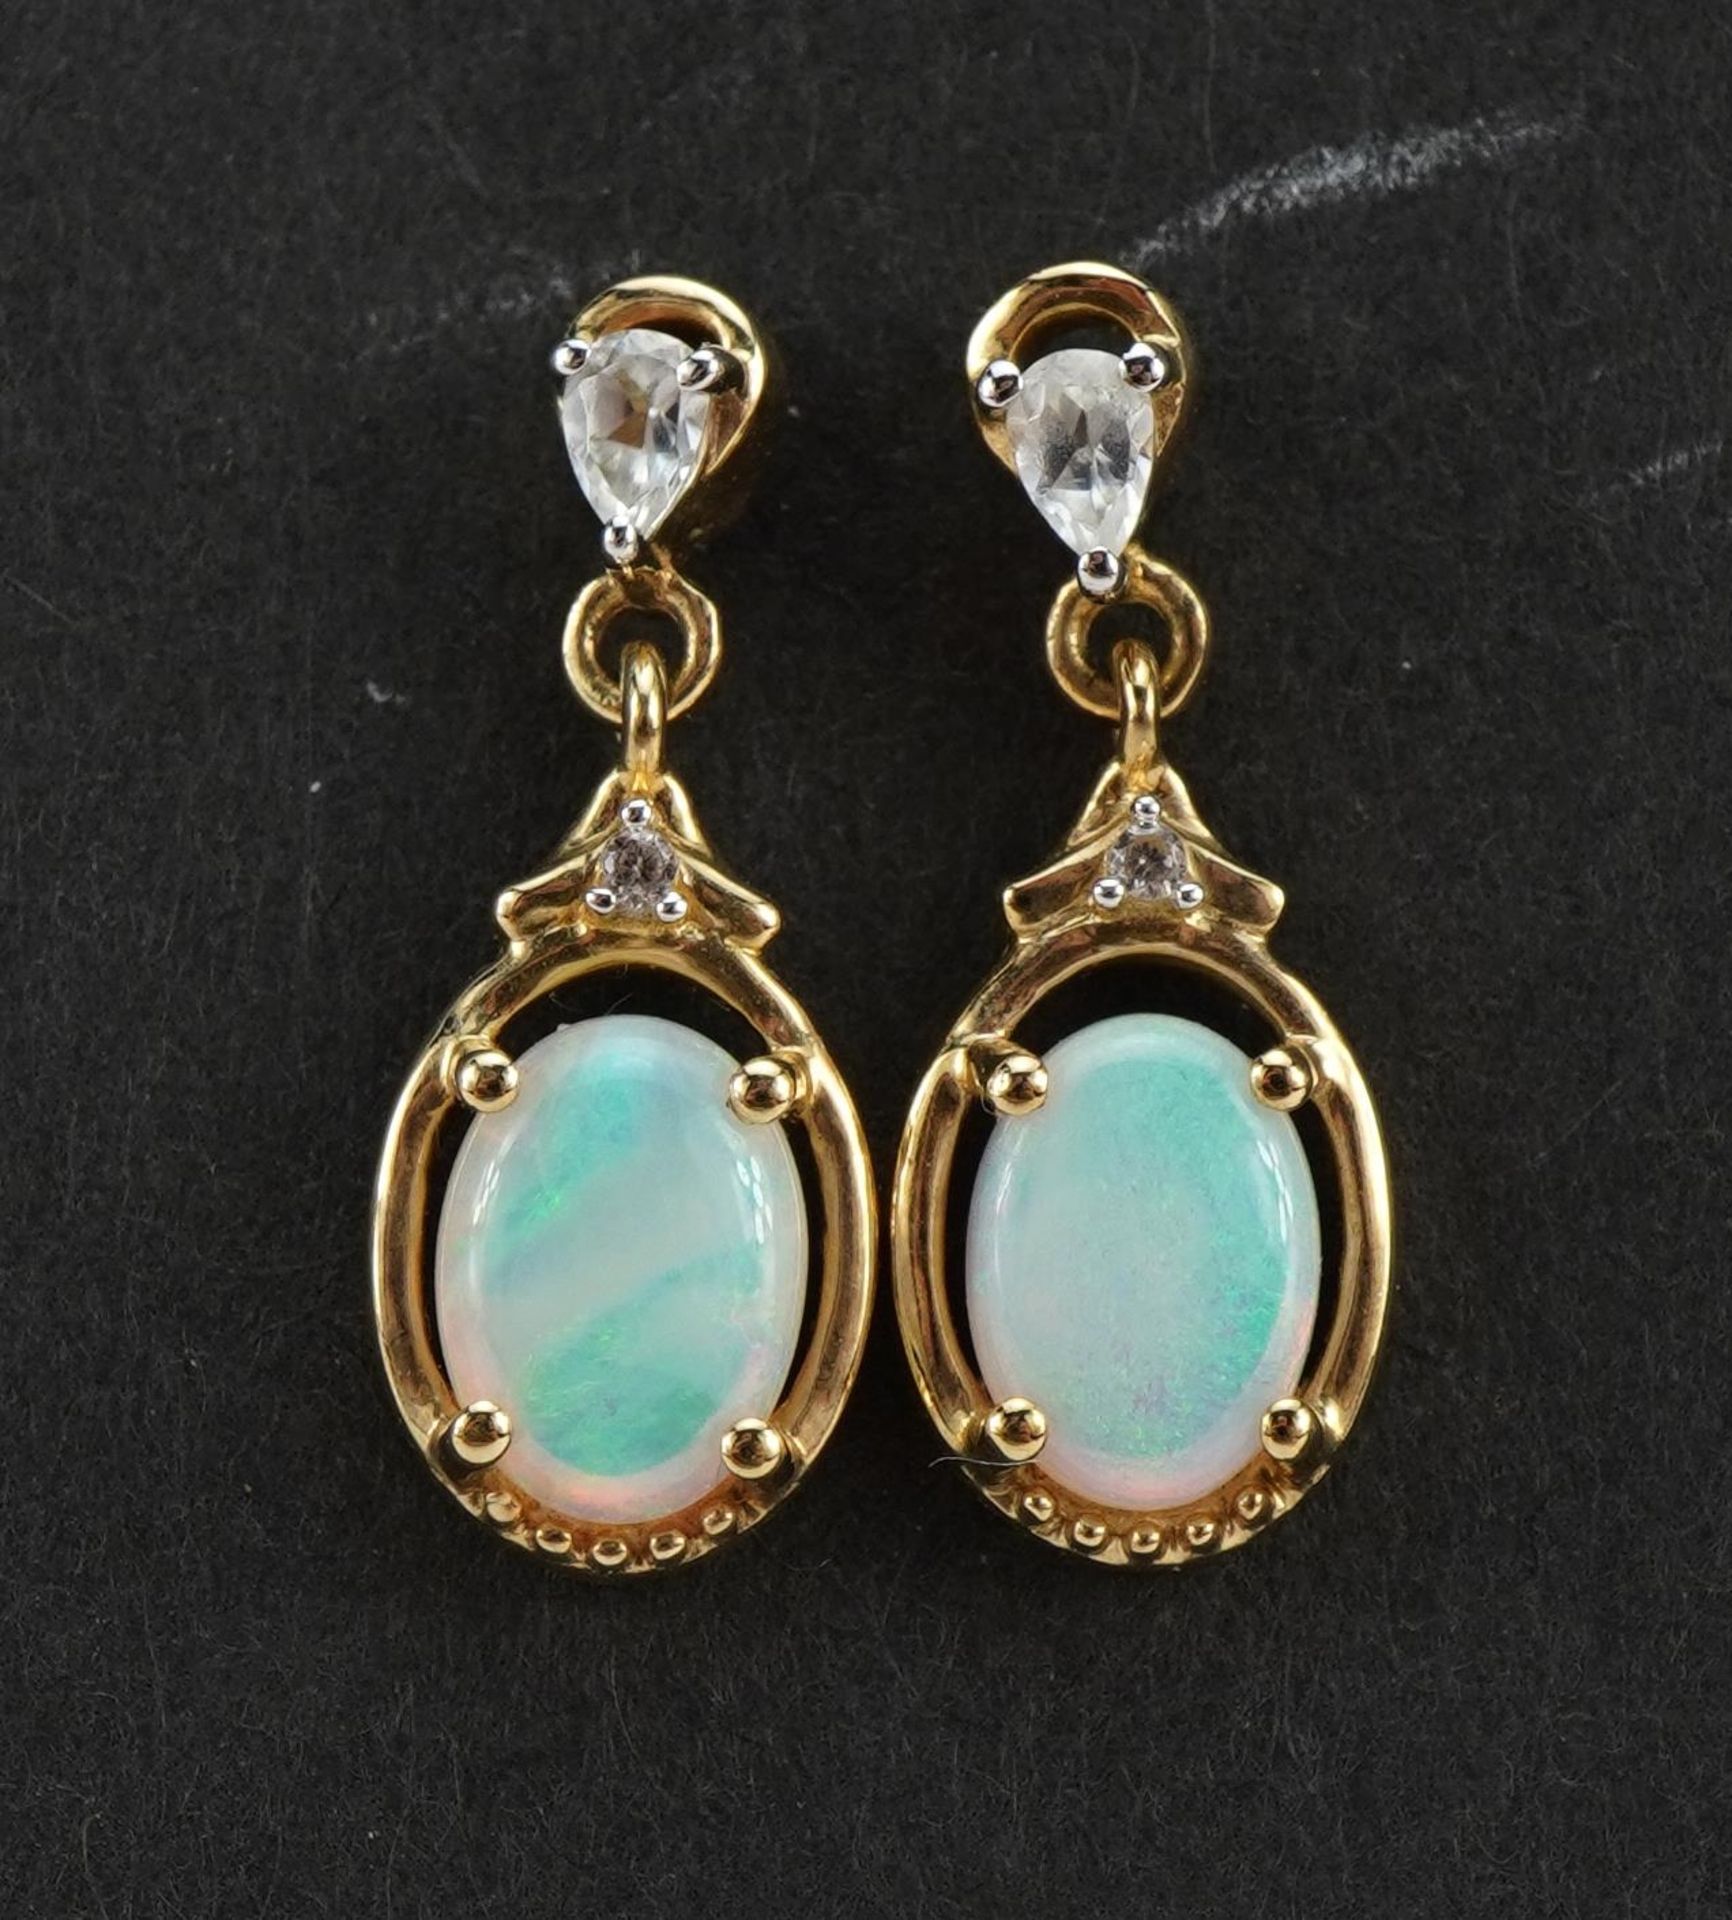 Pair of 9ct gold opal and clear stone drop earrings, the clear stones test as sapphire, 1.8cm